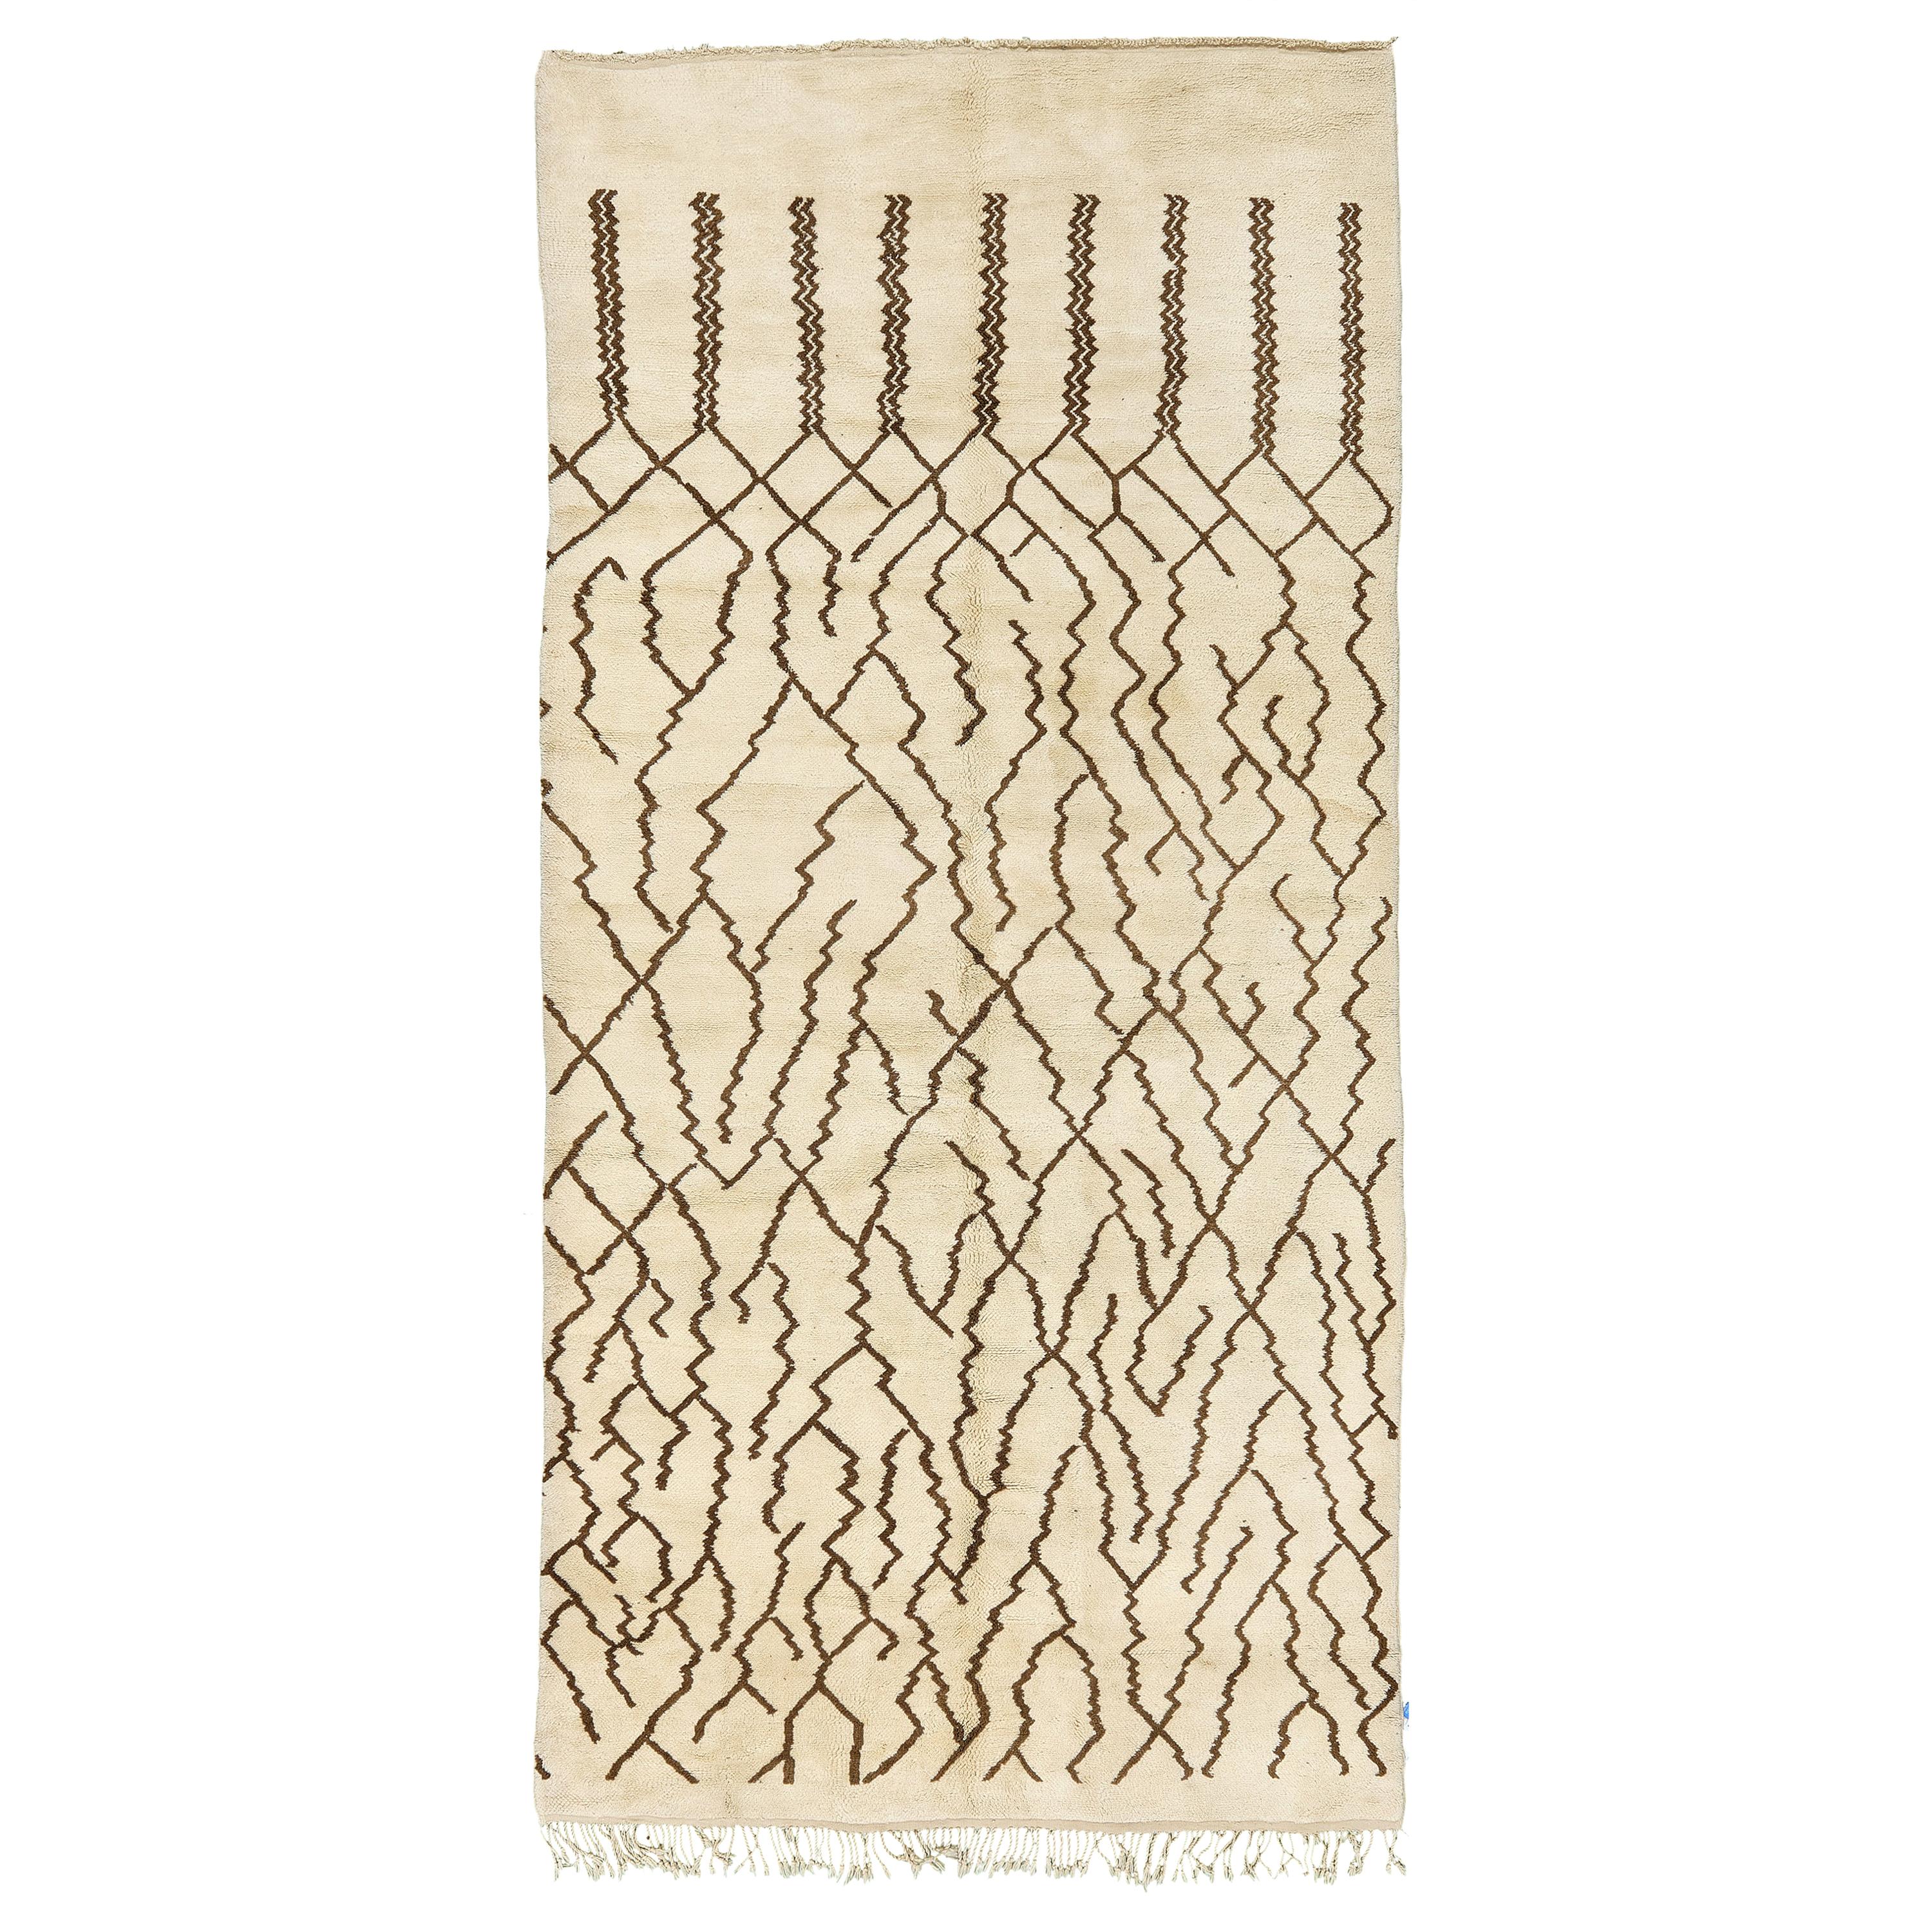 Style to impress with this geometrically abstract rug made from Morocco in Middle Atlas collection. A field of sand enhances the chocolate brown extended lozenges and zigzag patterns. The stunning beauty of impressive creation that will make your